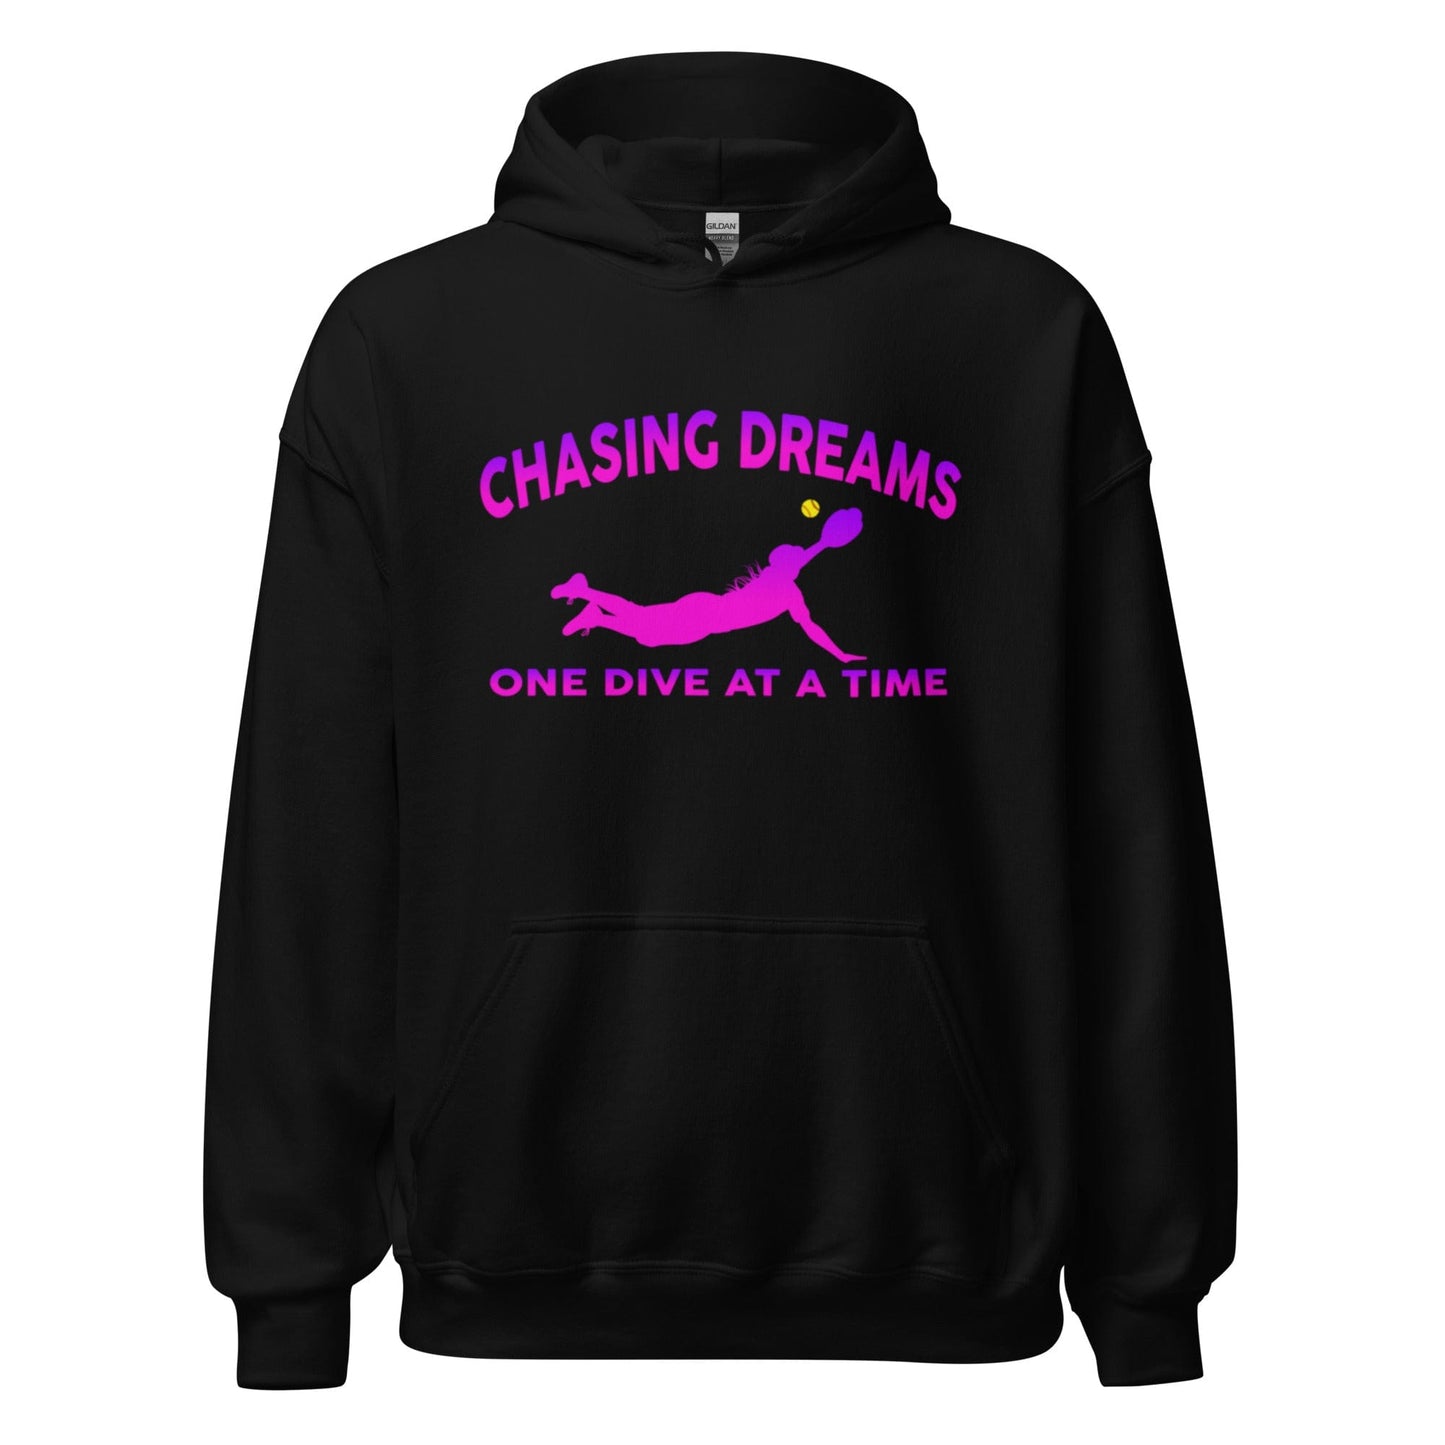 Chasing Dreams One Dive At A Time - Adult Hoodie